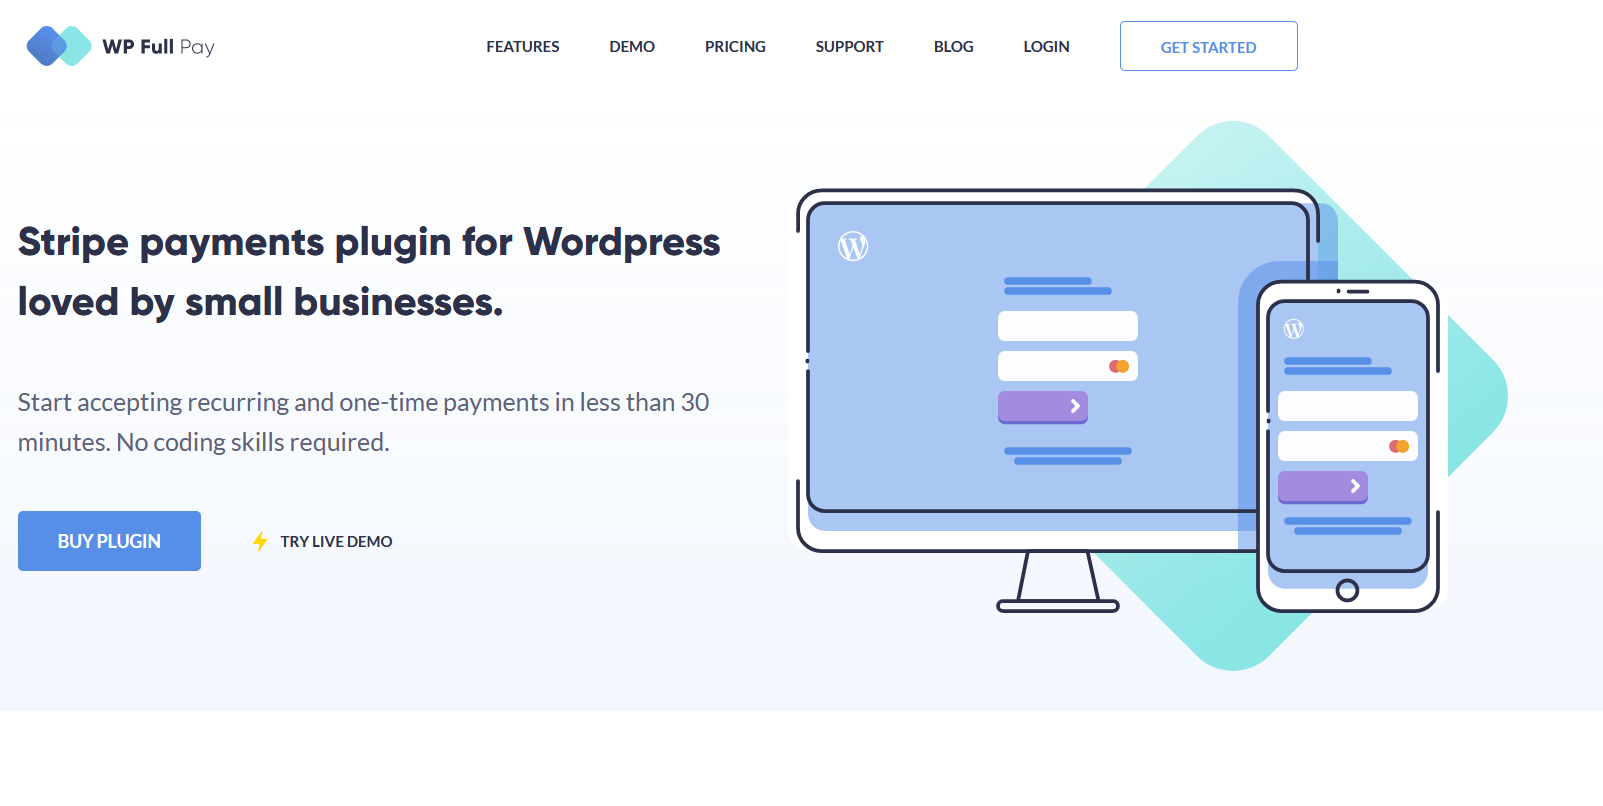 Besides installing an efficient WordPress SSL plugin on your website, the WP Full Pay plugin helps you accept Stripe payments with peace of mind.